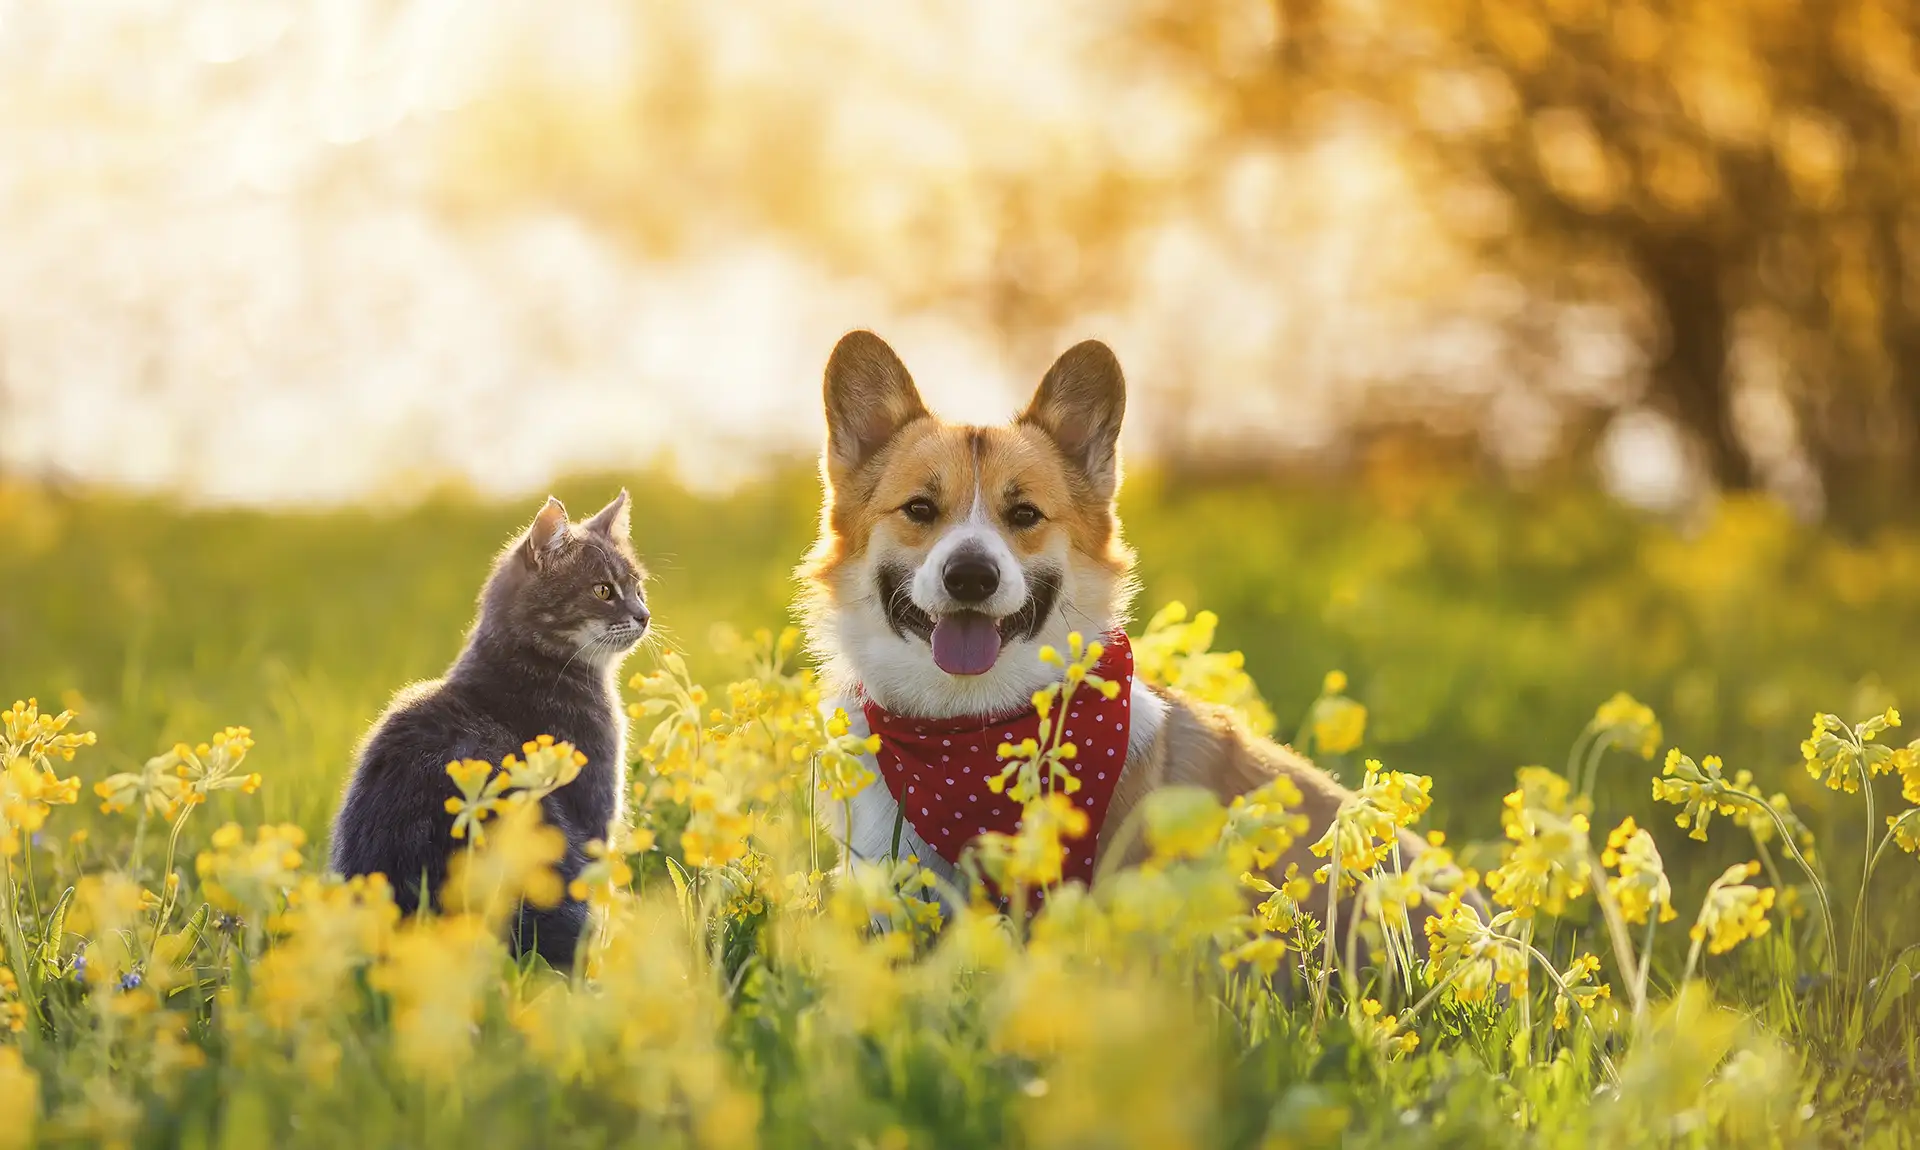 Dog and cat in a field of wild flowers